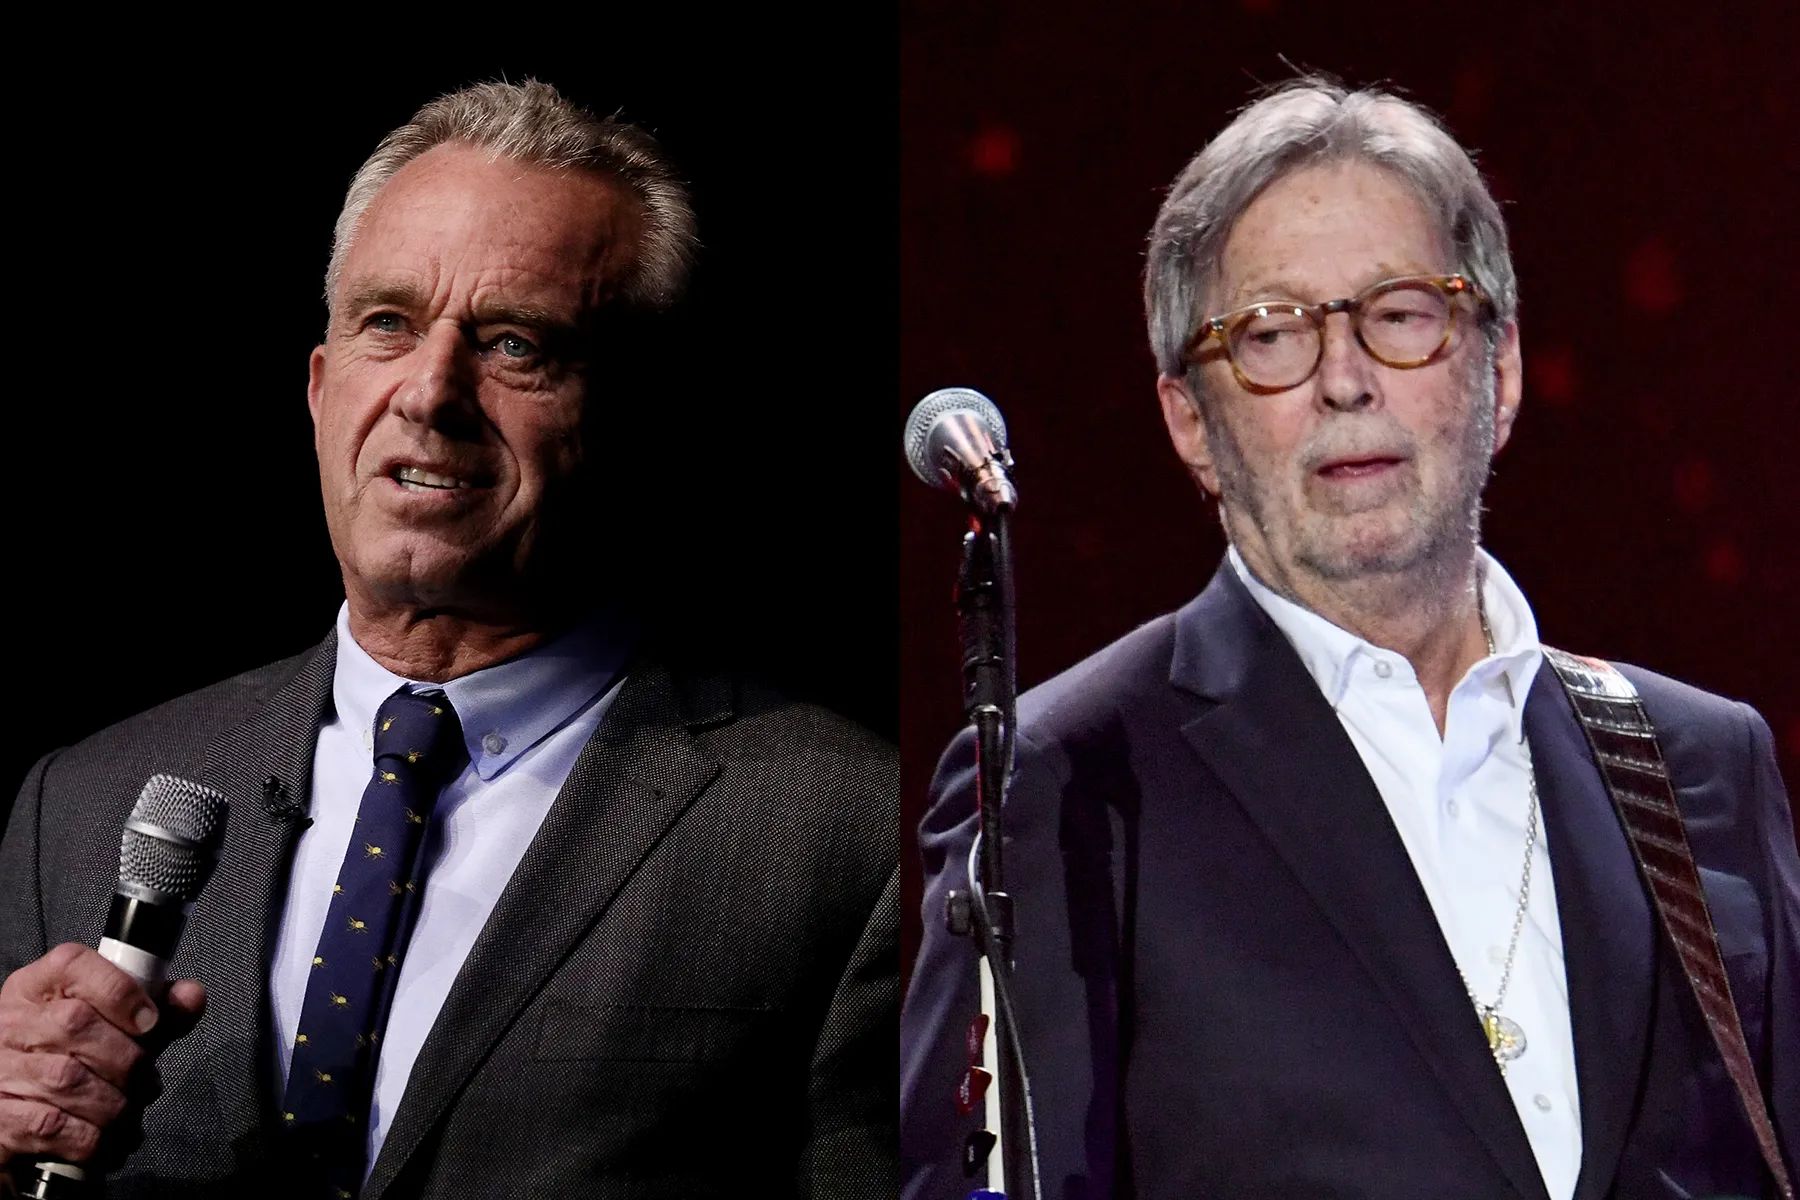 eric-clapton-raises-2-2-million-for-robert-f-kennedy-jr-campaign-with-private-concert